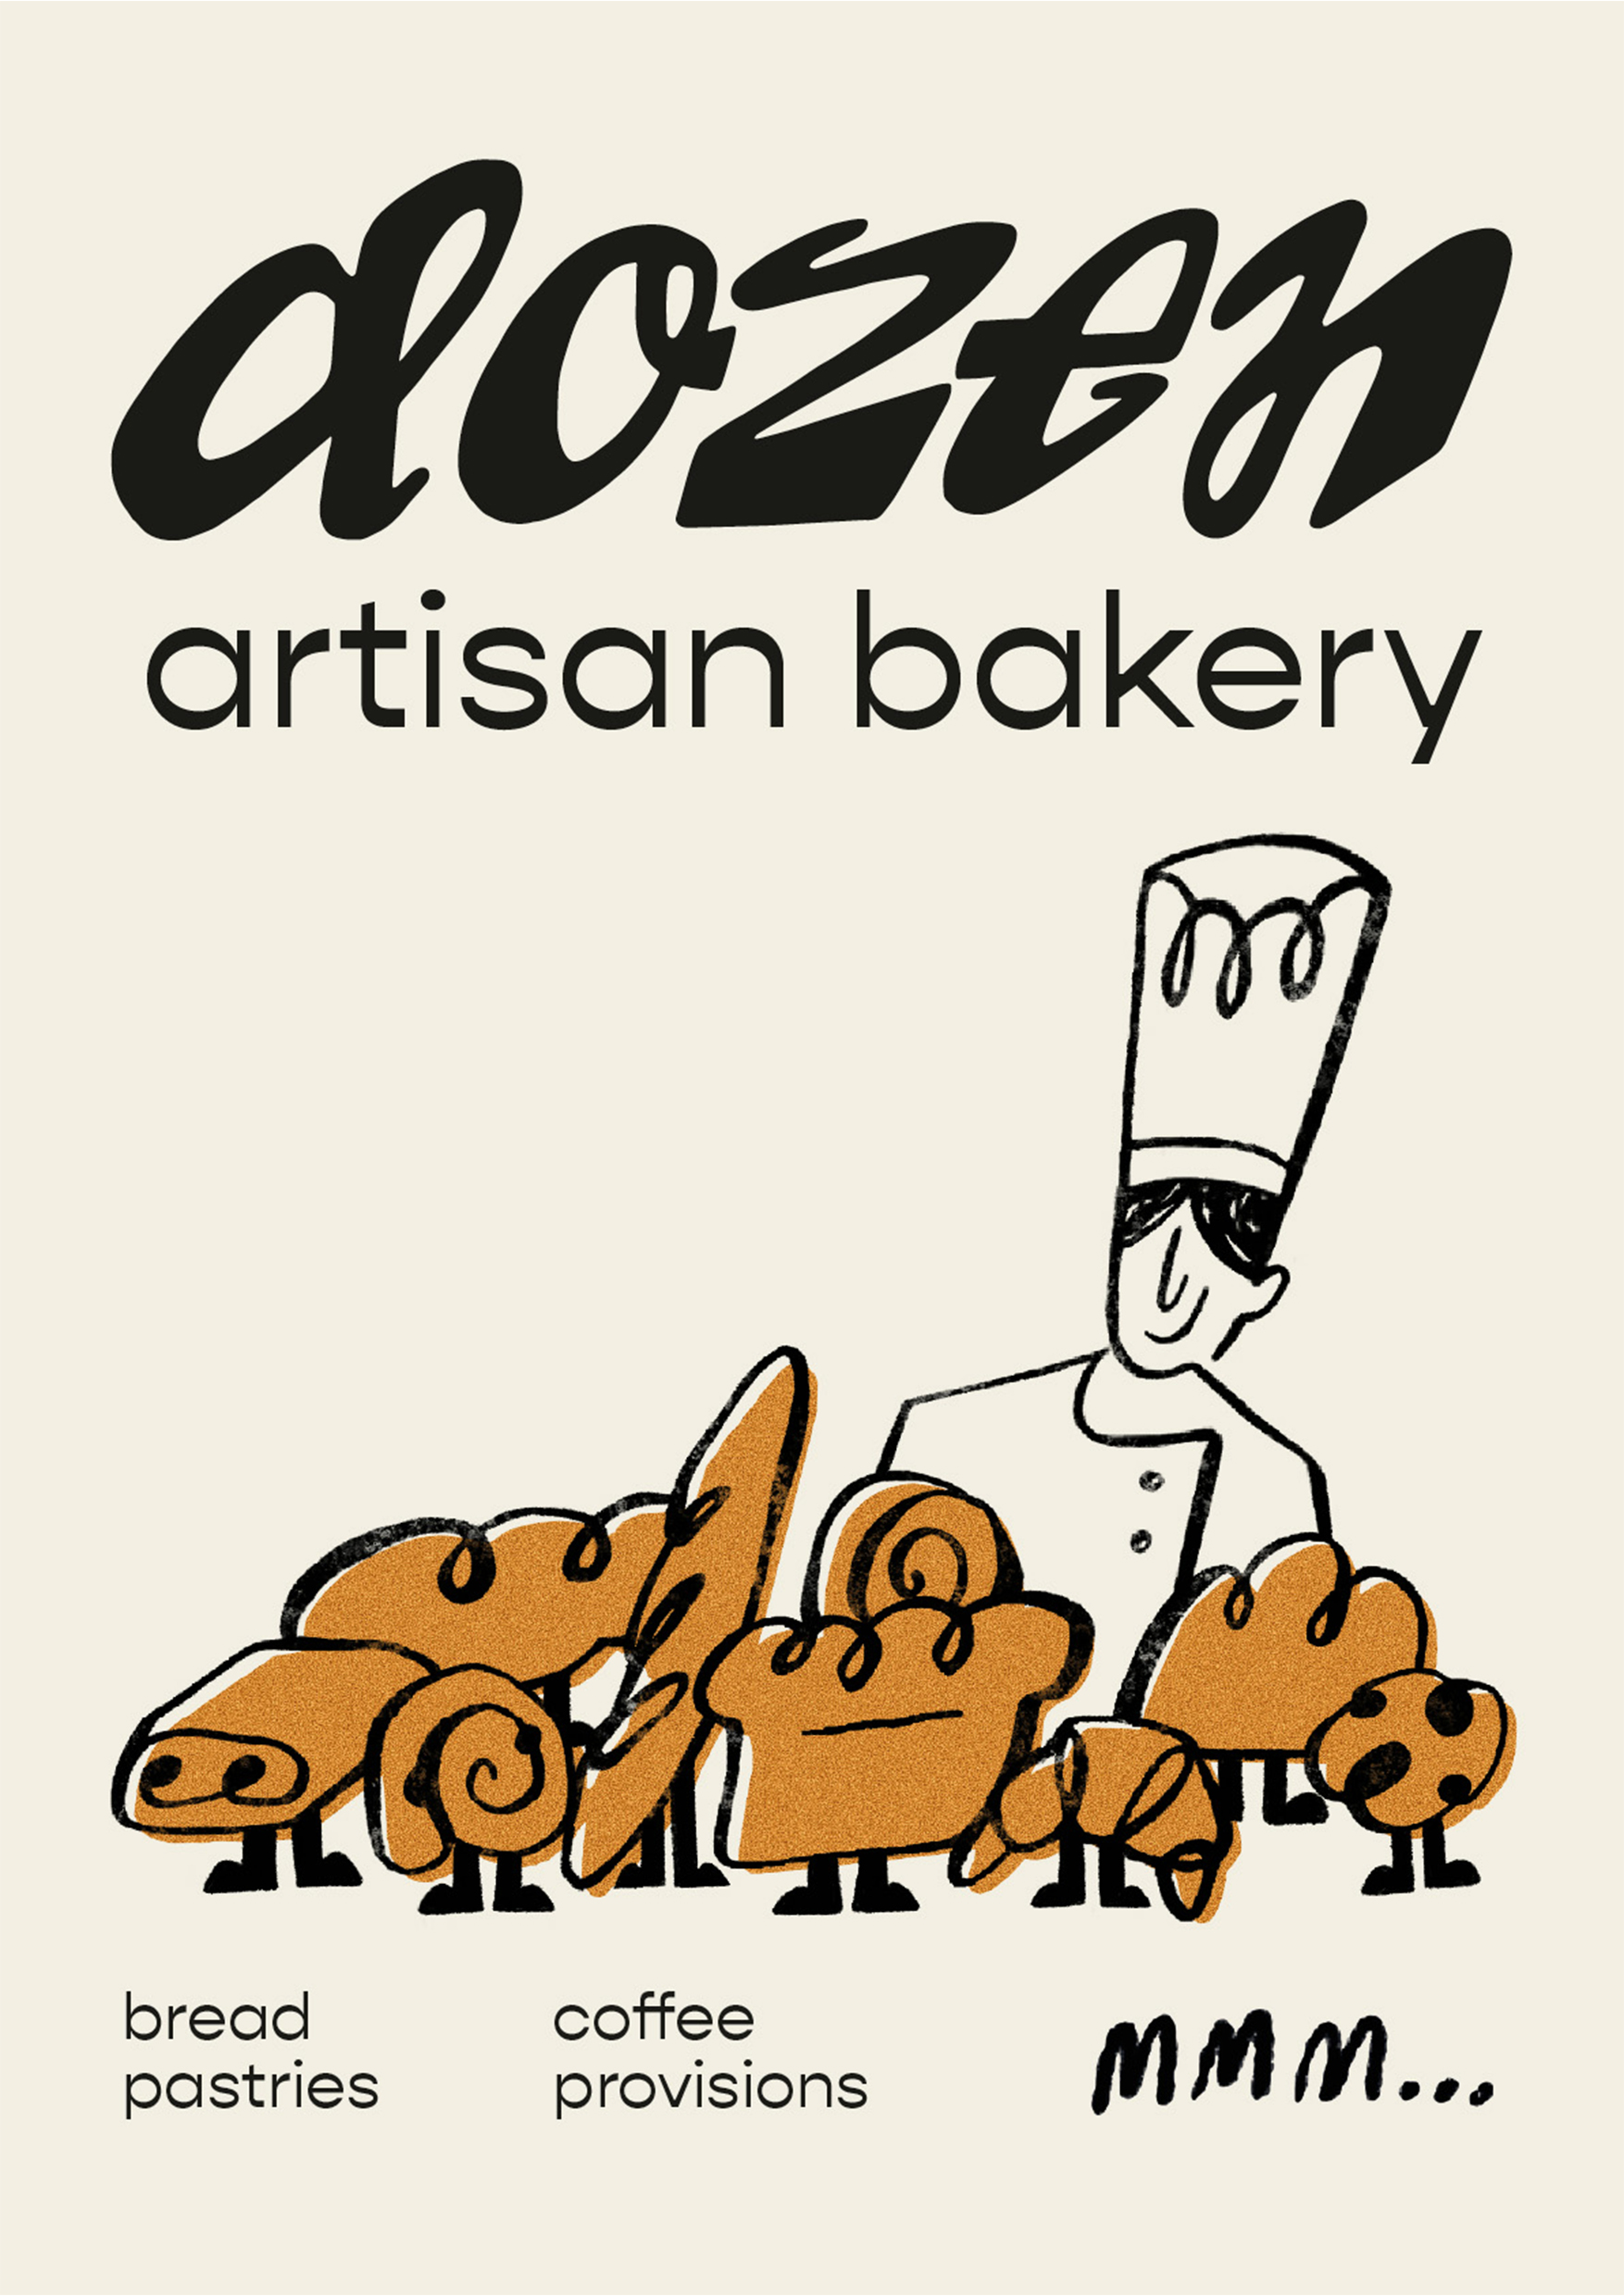 Illustrated bakery poster by Andrea Hammersley showing simple line drawings of baked goods, chef character and typography, with a swirling motif throughout.